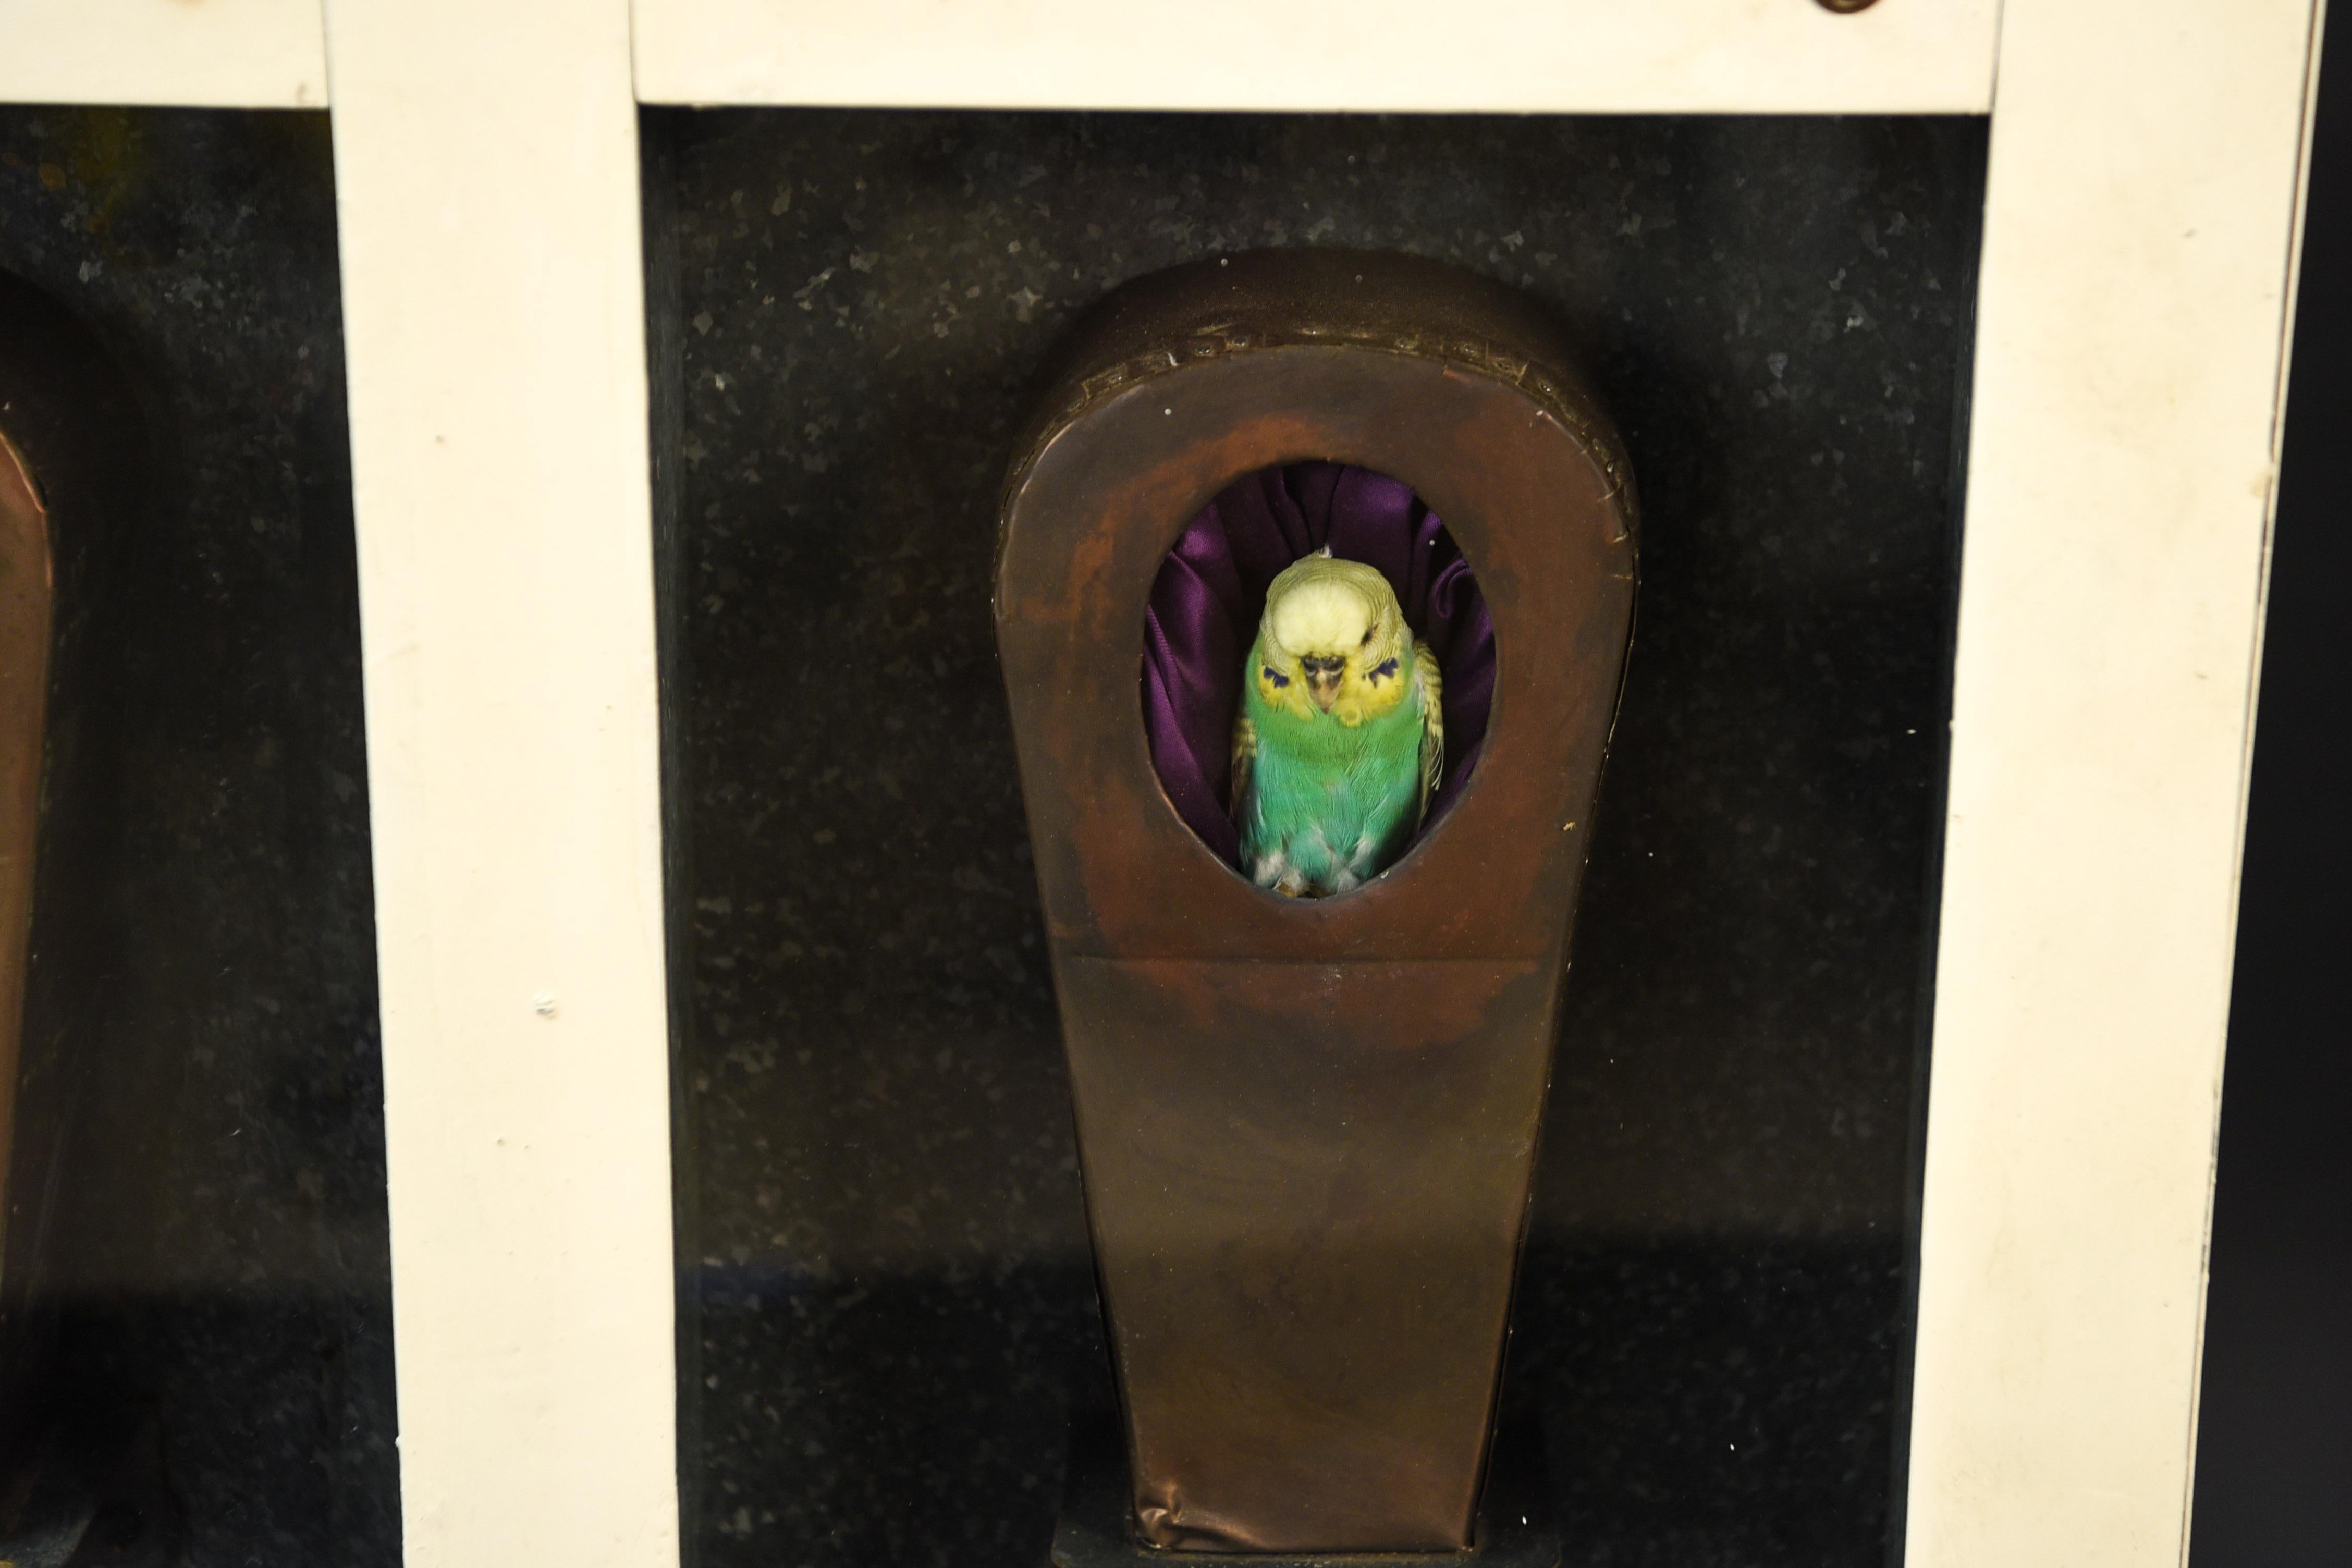 Untitled (Parakeet Coffin Sculpture), mixed-media, 1988 by Eric Goode.
This unique piece will definitely be a conversation starter.
Label: BESS CUTLER, N.Y.C.
Provenance: From the collection of Marty Edelston, founder Bottom Line Publications